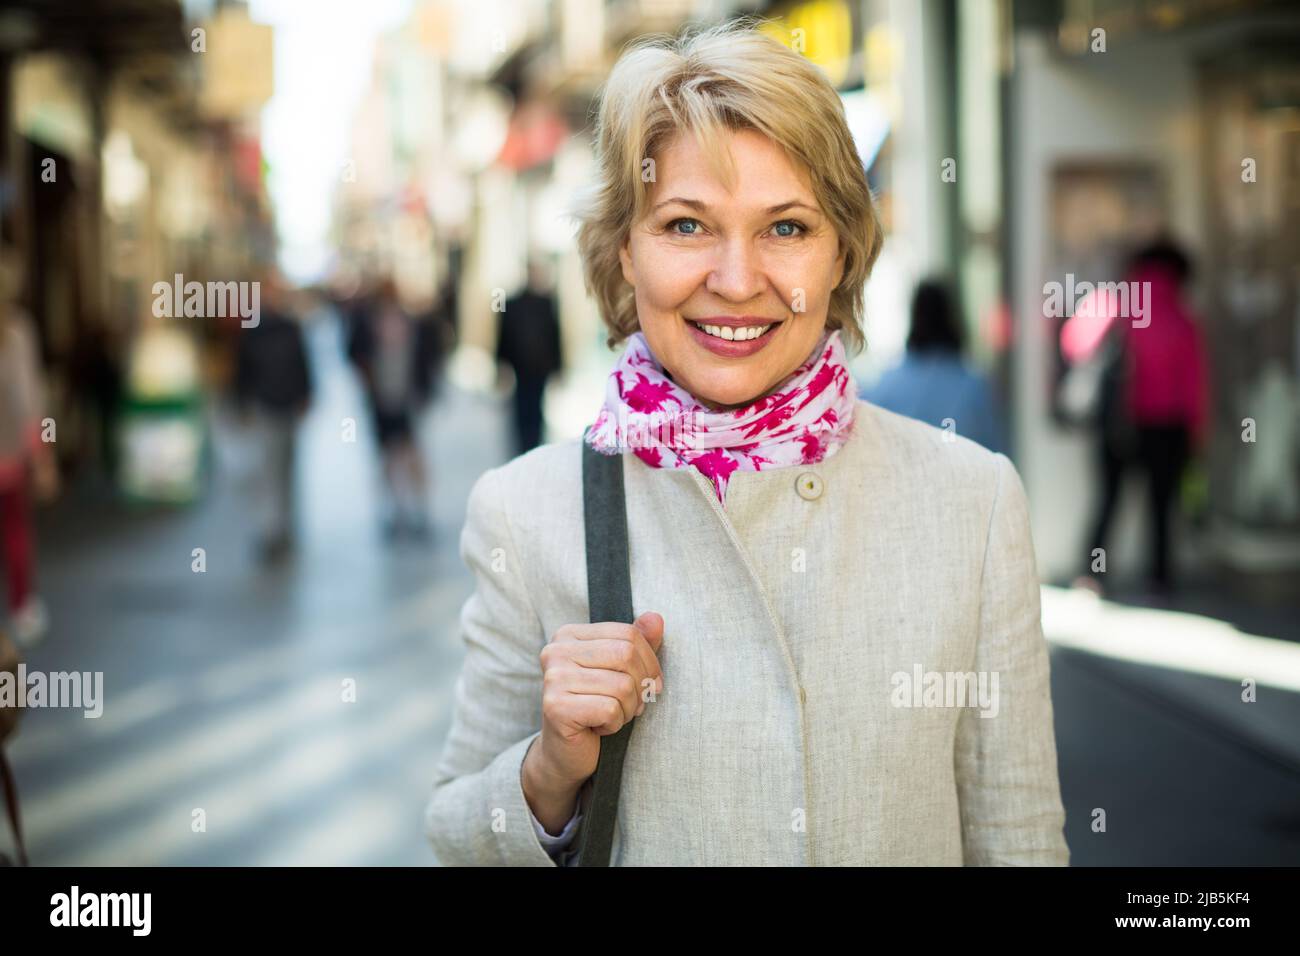 Senior woman standing on street in town. Stock Photo